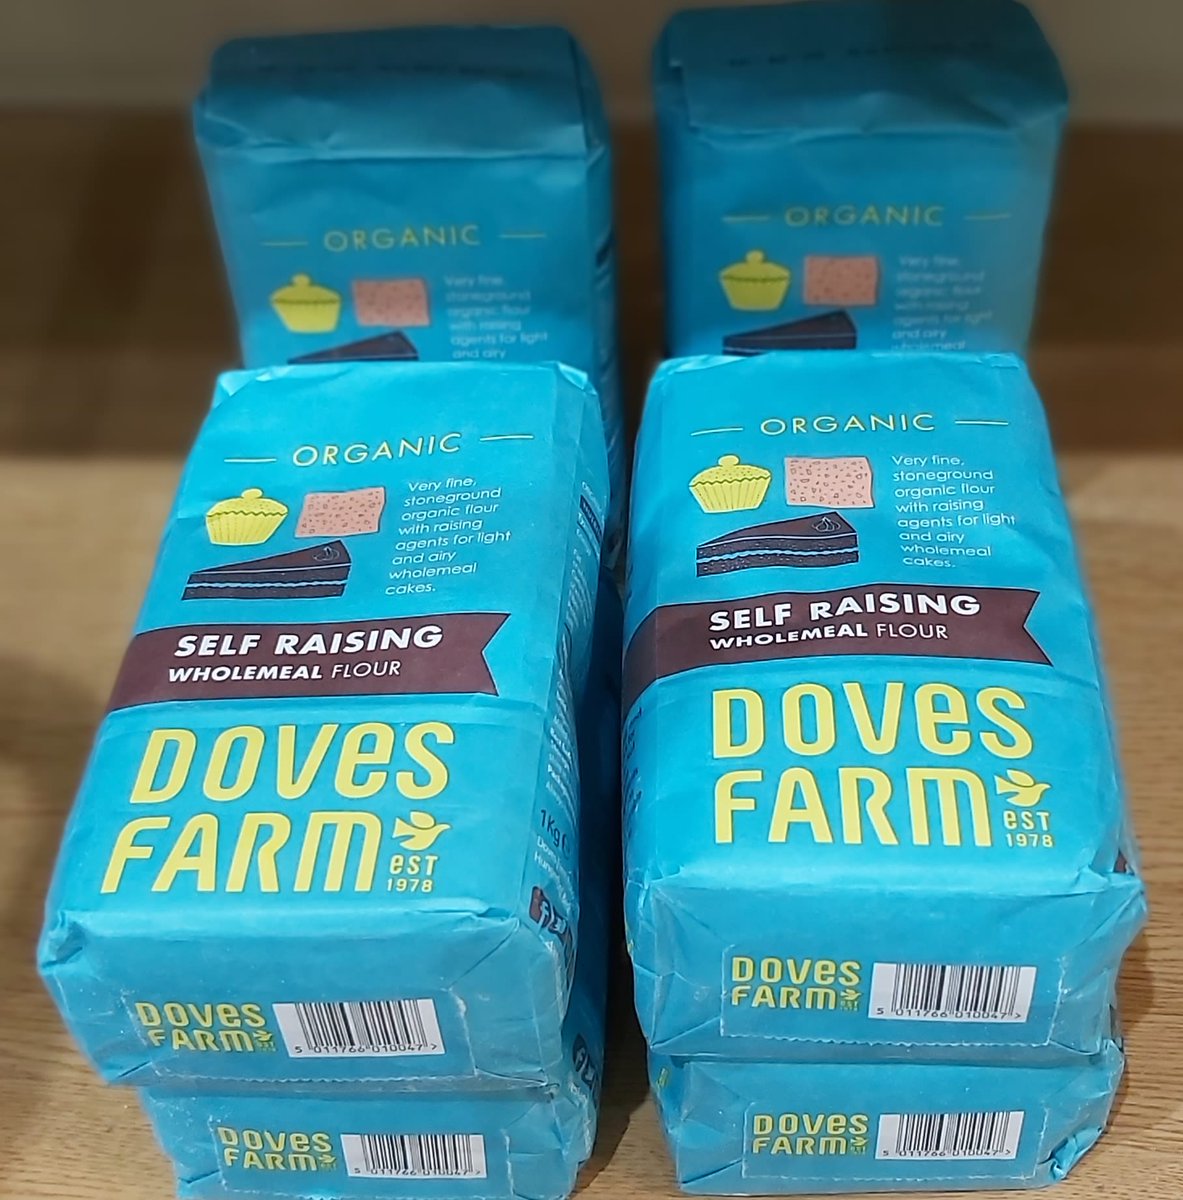 🎉Back in Stock -
Doves Farm Self Raising Wholemeal Flour 1KG £1.49 

Very fine, stoneground organic flour with raising agents for light and airy wholemeal cakes.
@Dovesfarm

#dovesfarm #flour #wholemealflour #baking #cakes 
#cakemaking #vegan  #organicflour #organic #healthzone